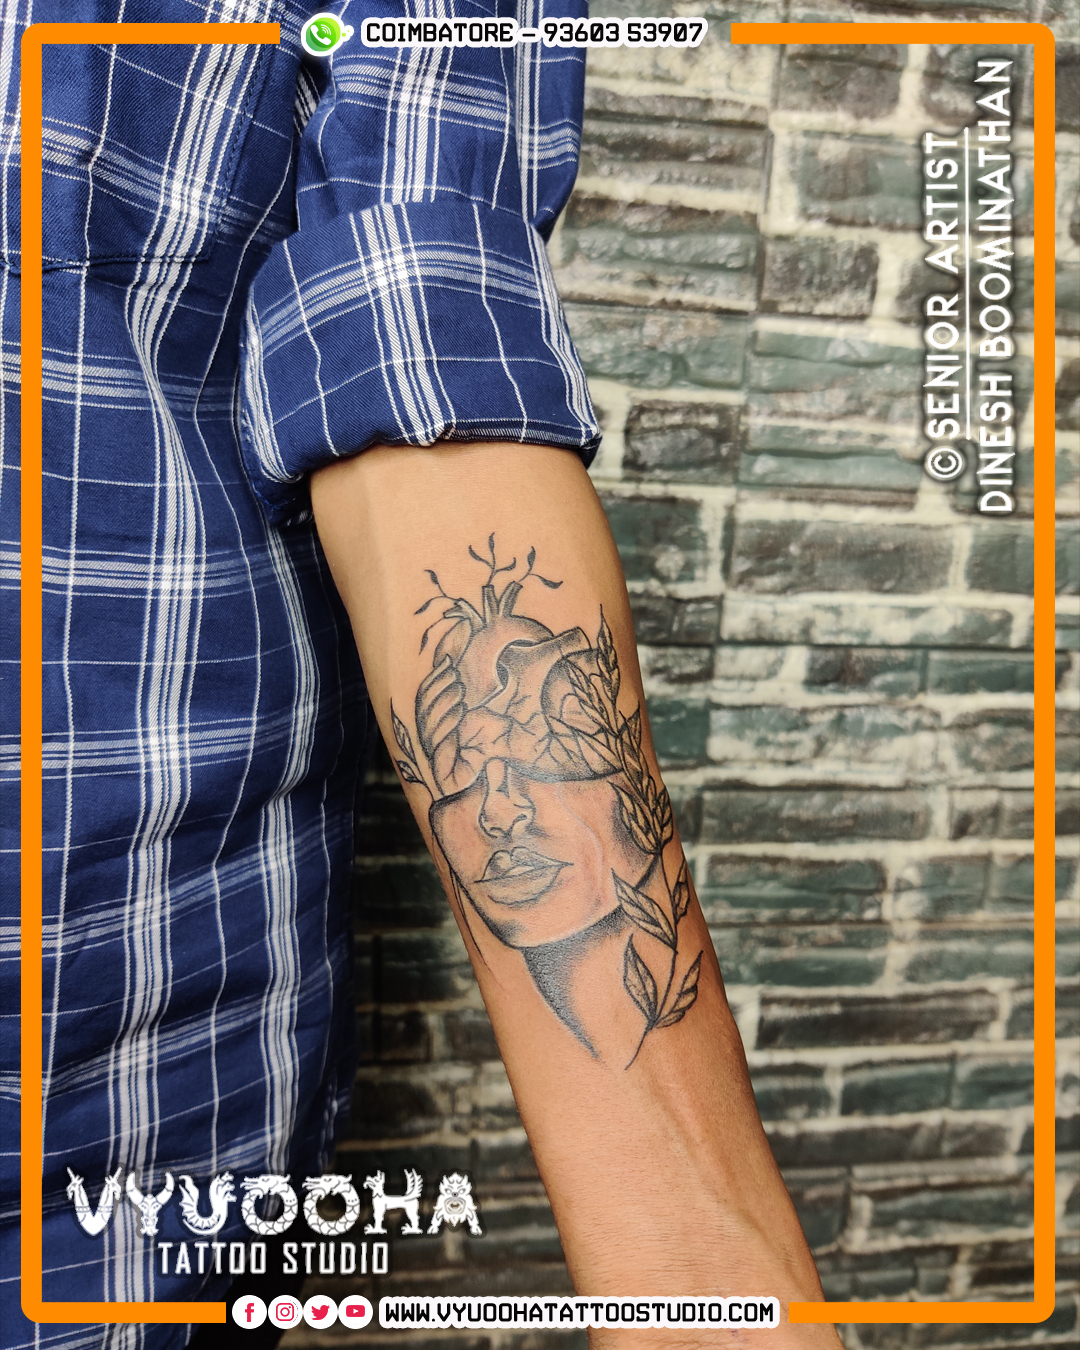 Best tattoo studio in coimbatore customize tattooBook your appointment   9360353907 short tattoo  YouTube